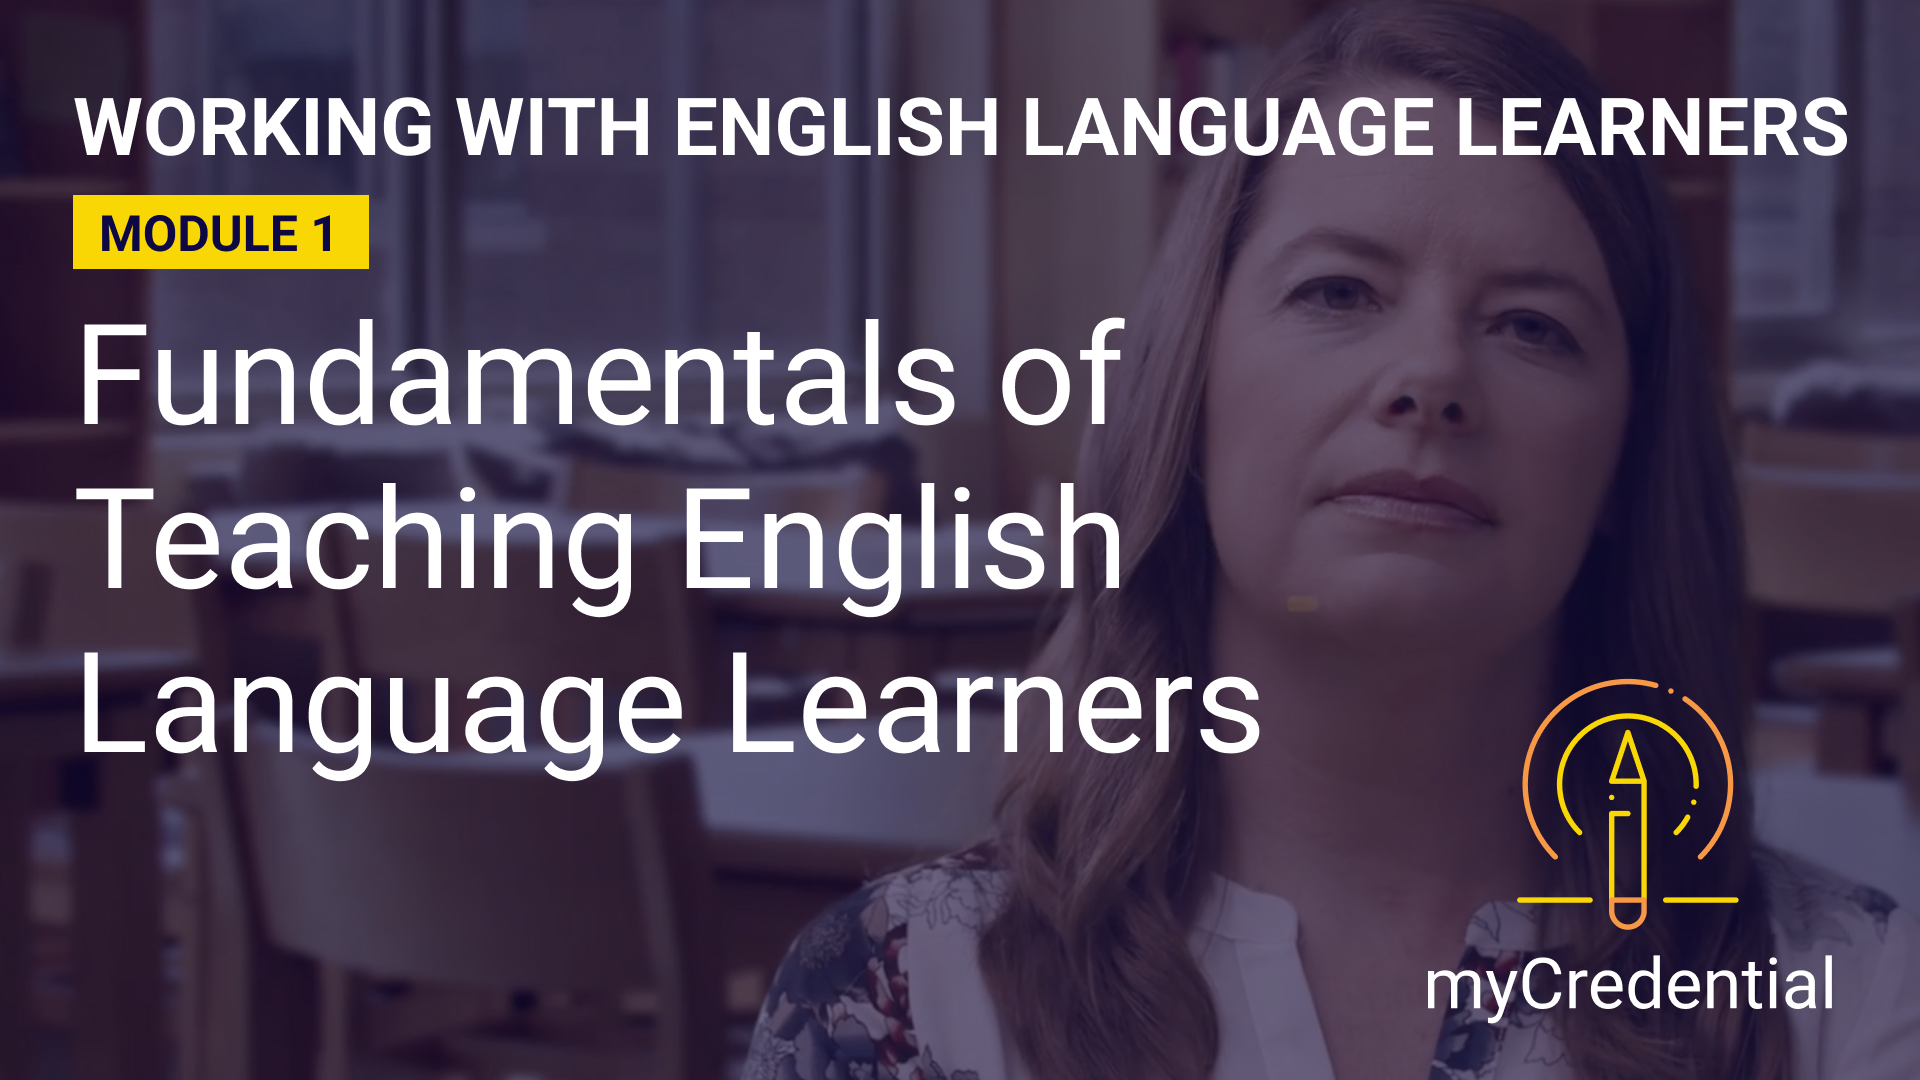 Working with English Language Learners (Unit 1): Fundamentals of Teaching ELs